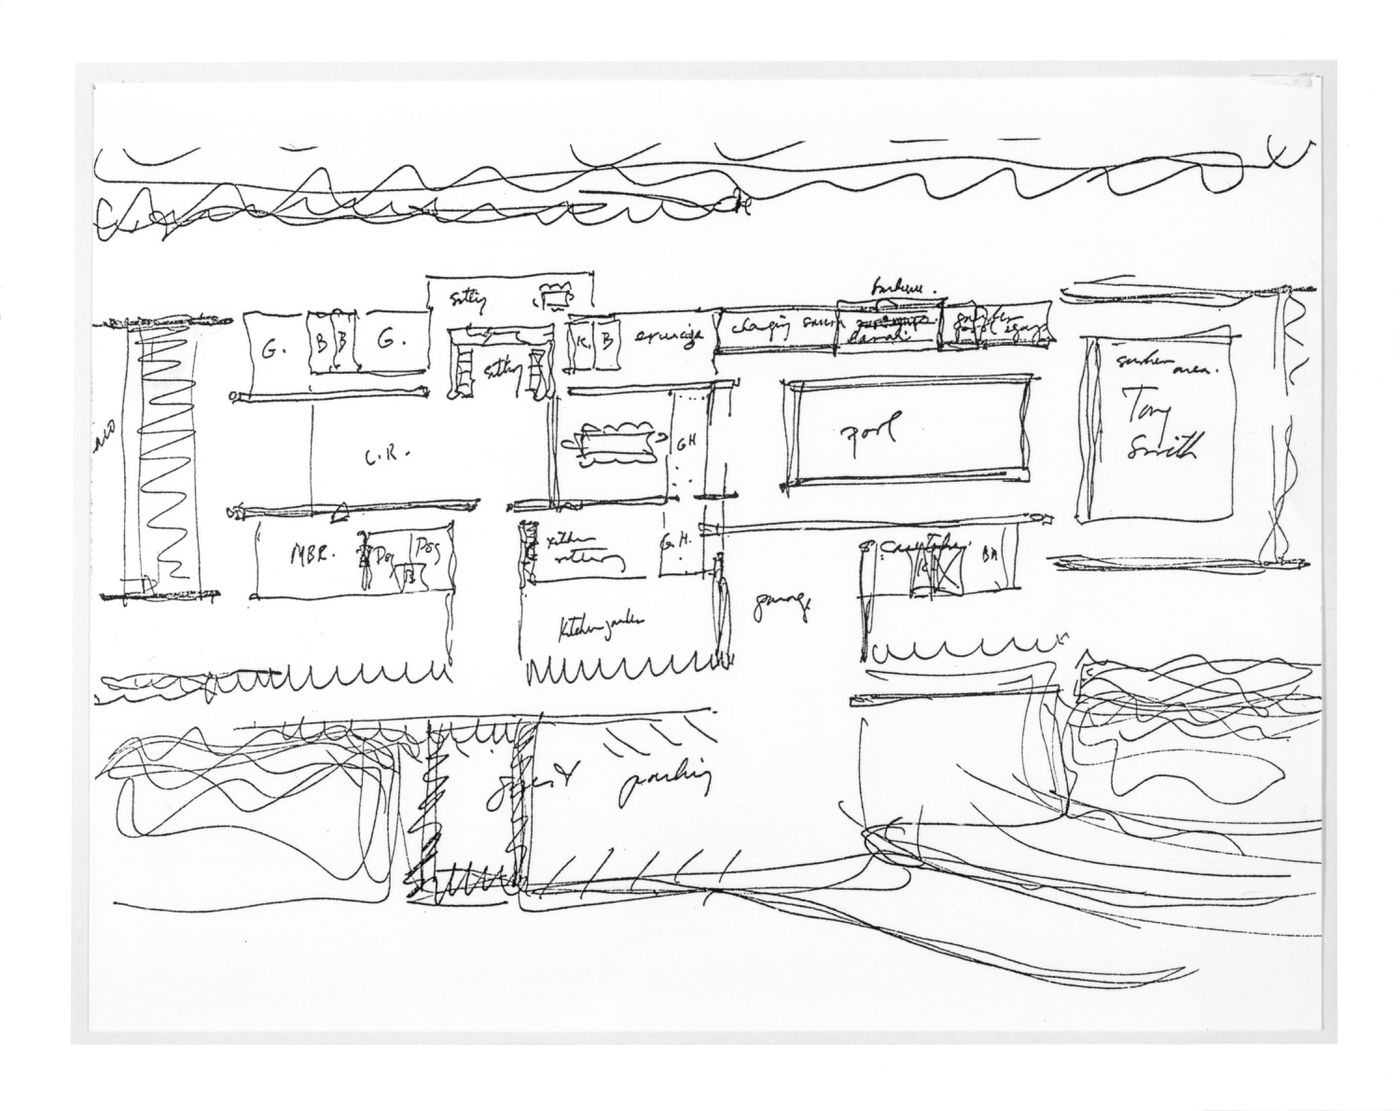 Preliminary sketch plan showing new functions, revised sketch plan